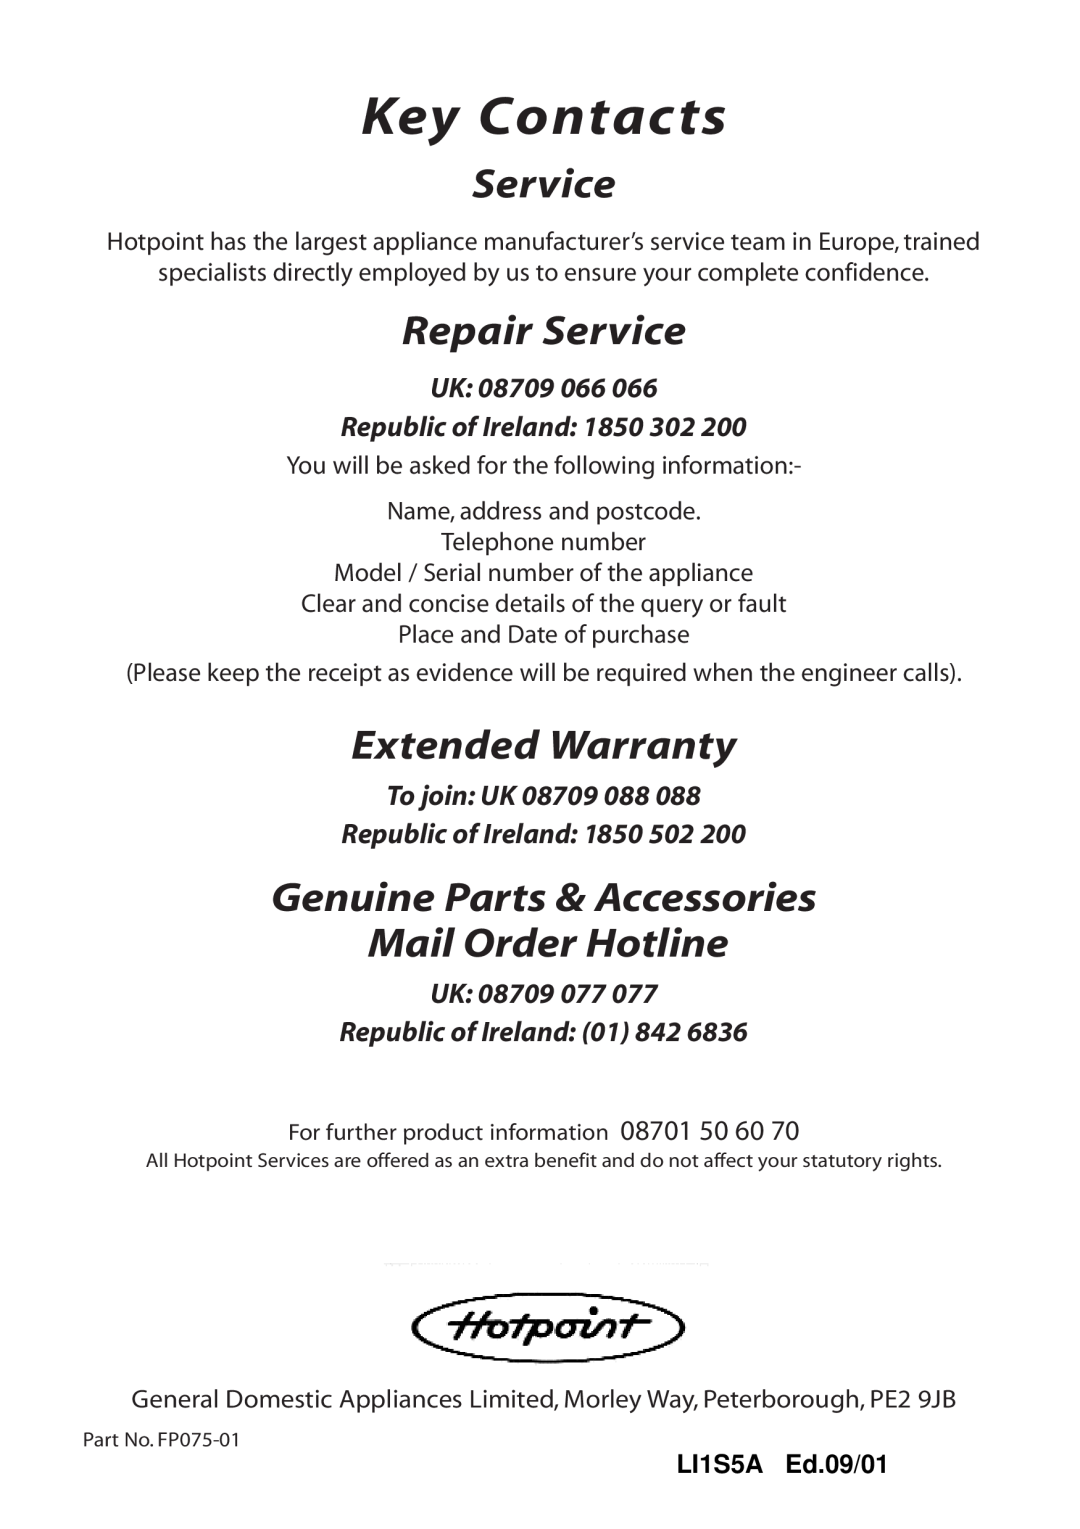 Hotpoint HTU30 manual Key Contacts, Repair Service, Extended Warranty, Genuine Parts & Accessories Mail Order Hotline 